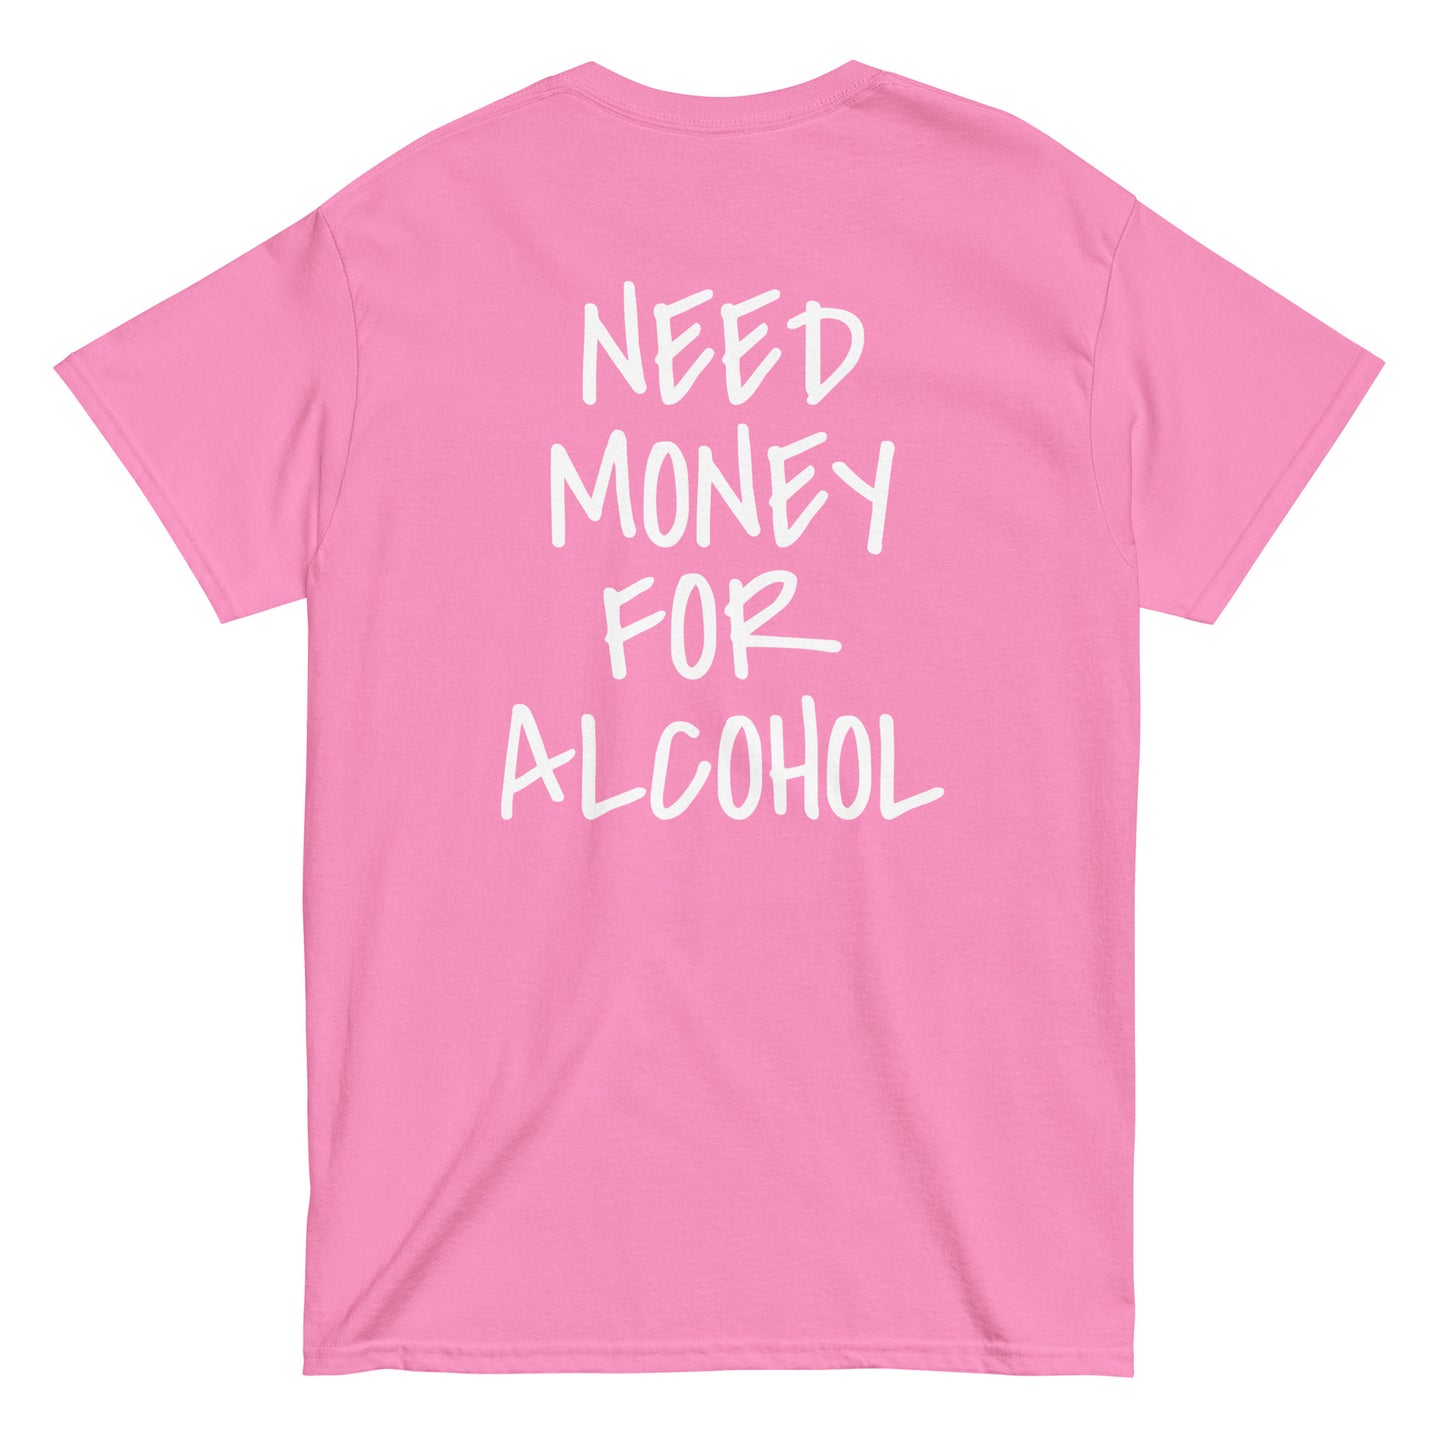 NEED MONEY FOR ALCOHOL T-Shirt [BACKPRINT]